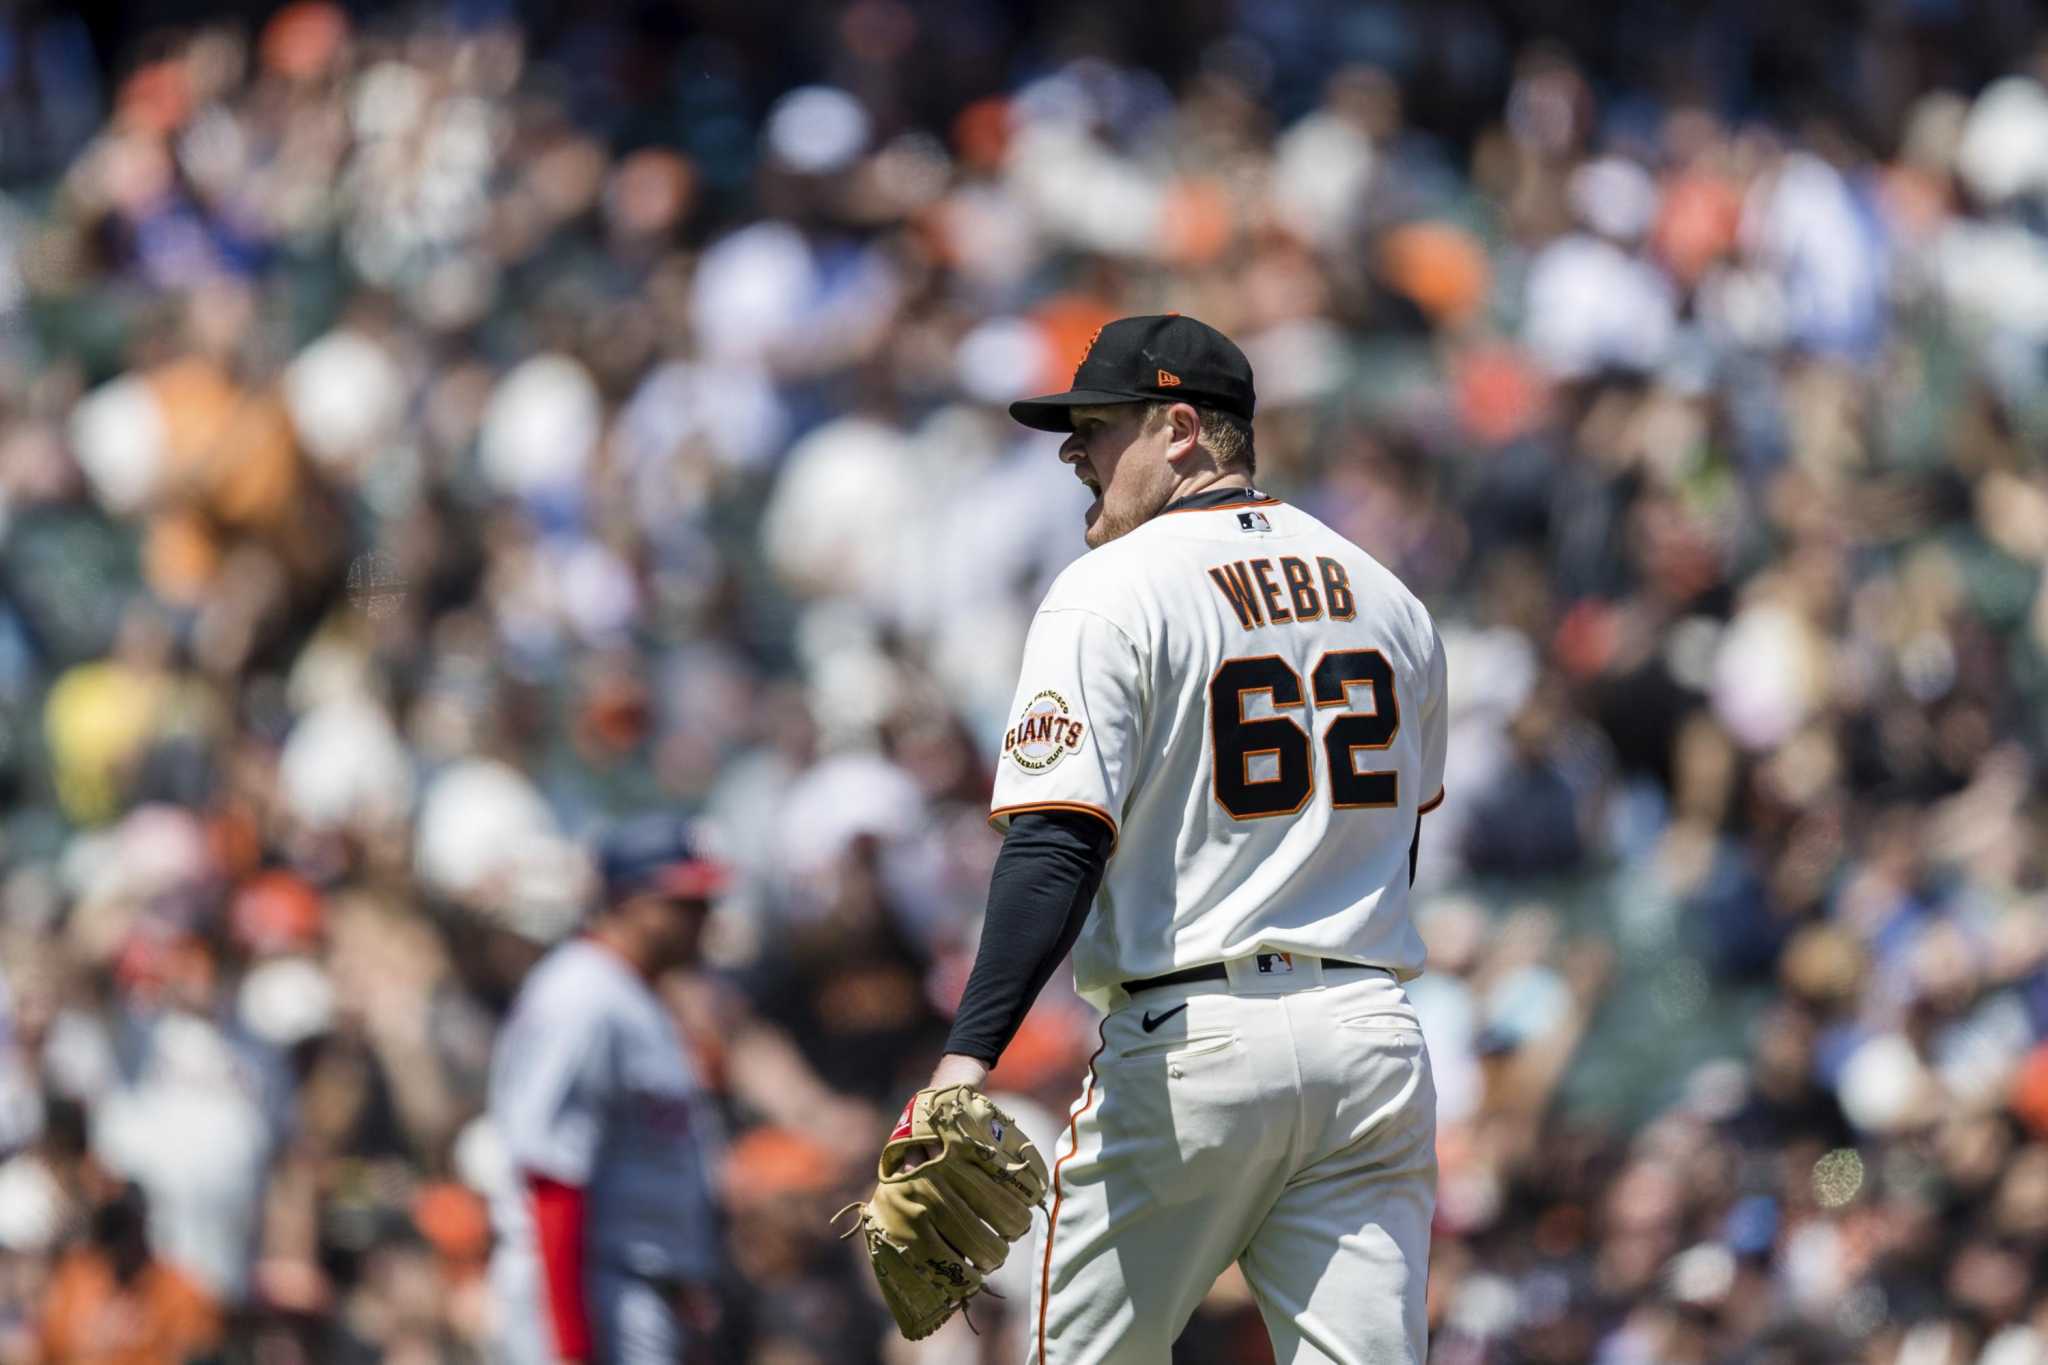 Giants' Logan Webb commits to pitch for Team USA in WBC